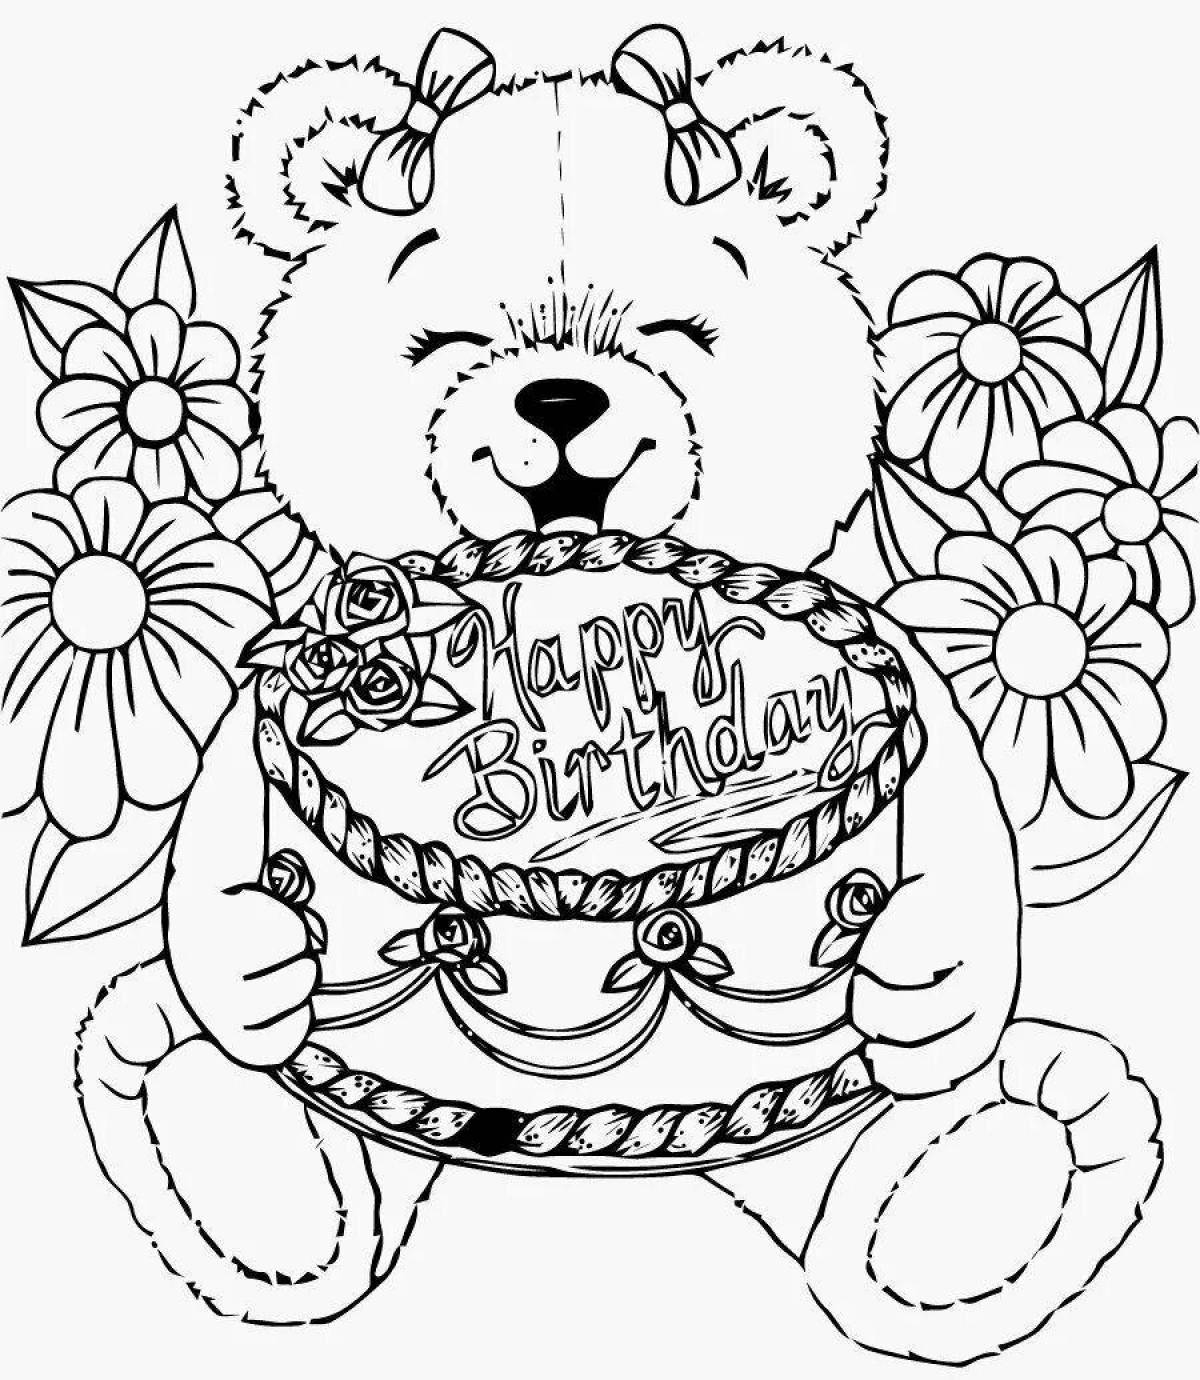 Fairytale mommy happy birthday coloring pages